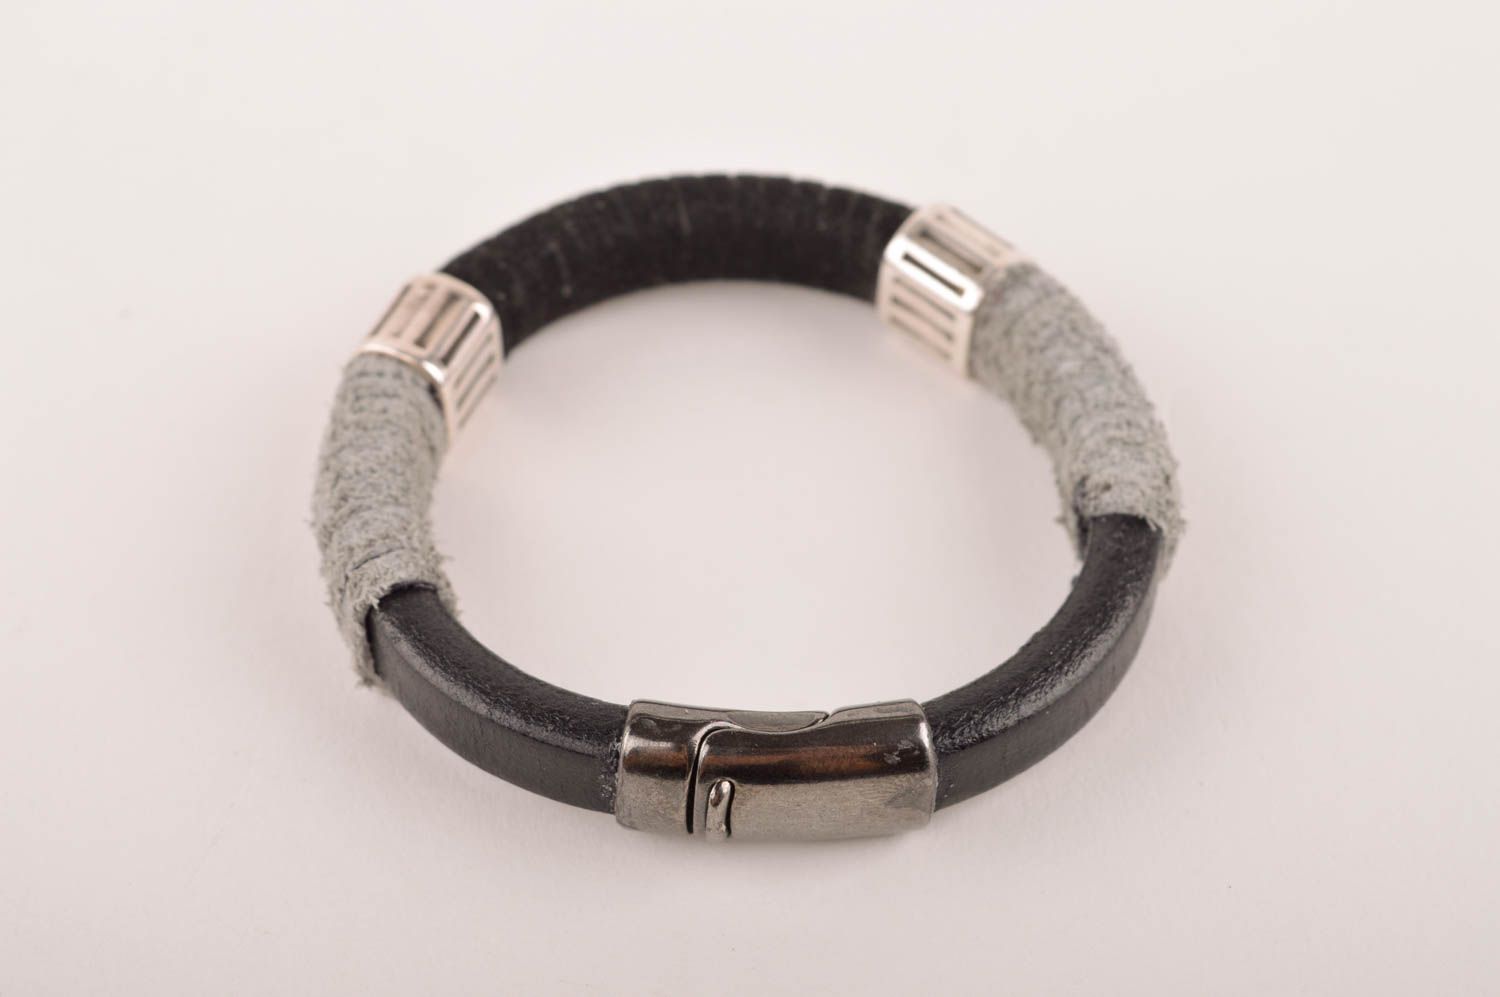 Unusual handmade leather bracelet leather goods handmade accessories for girls photo 4